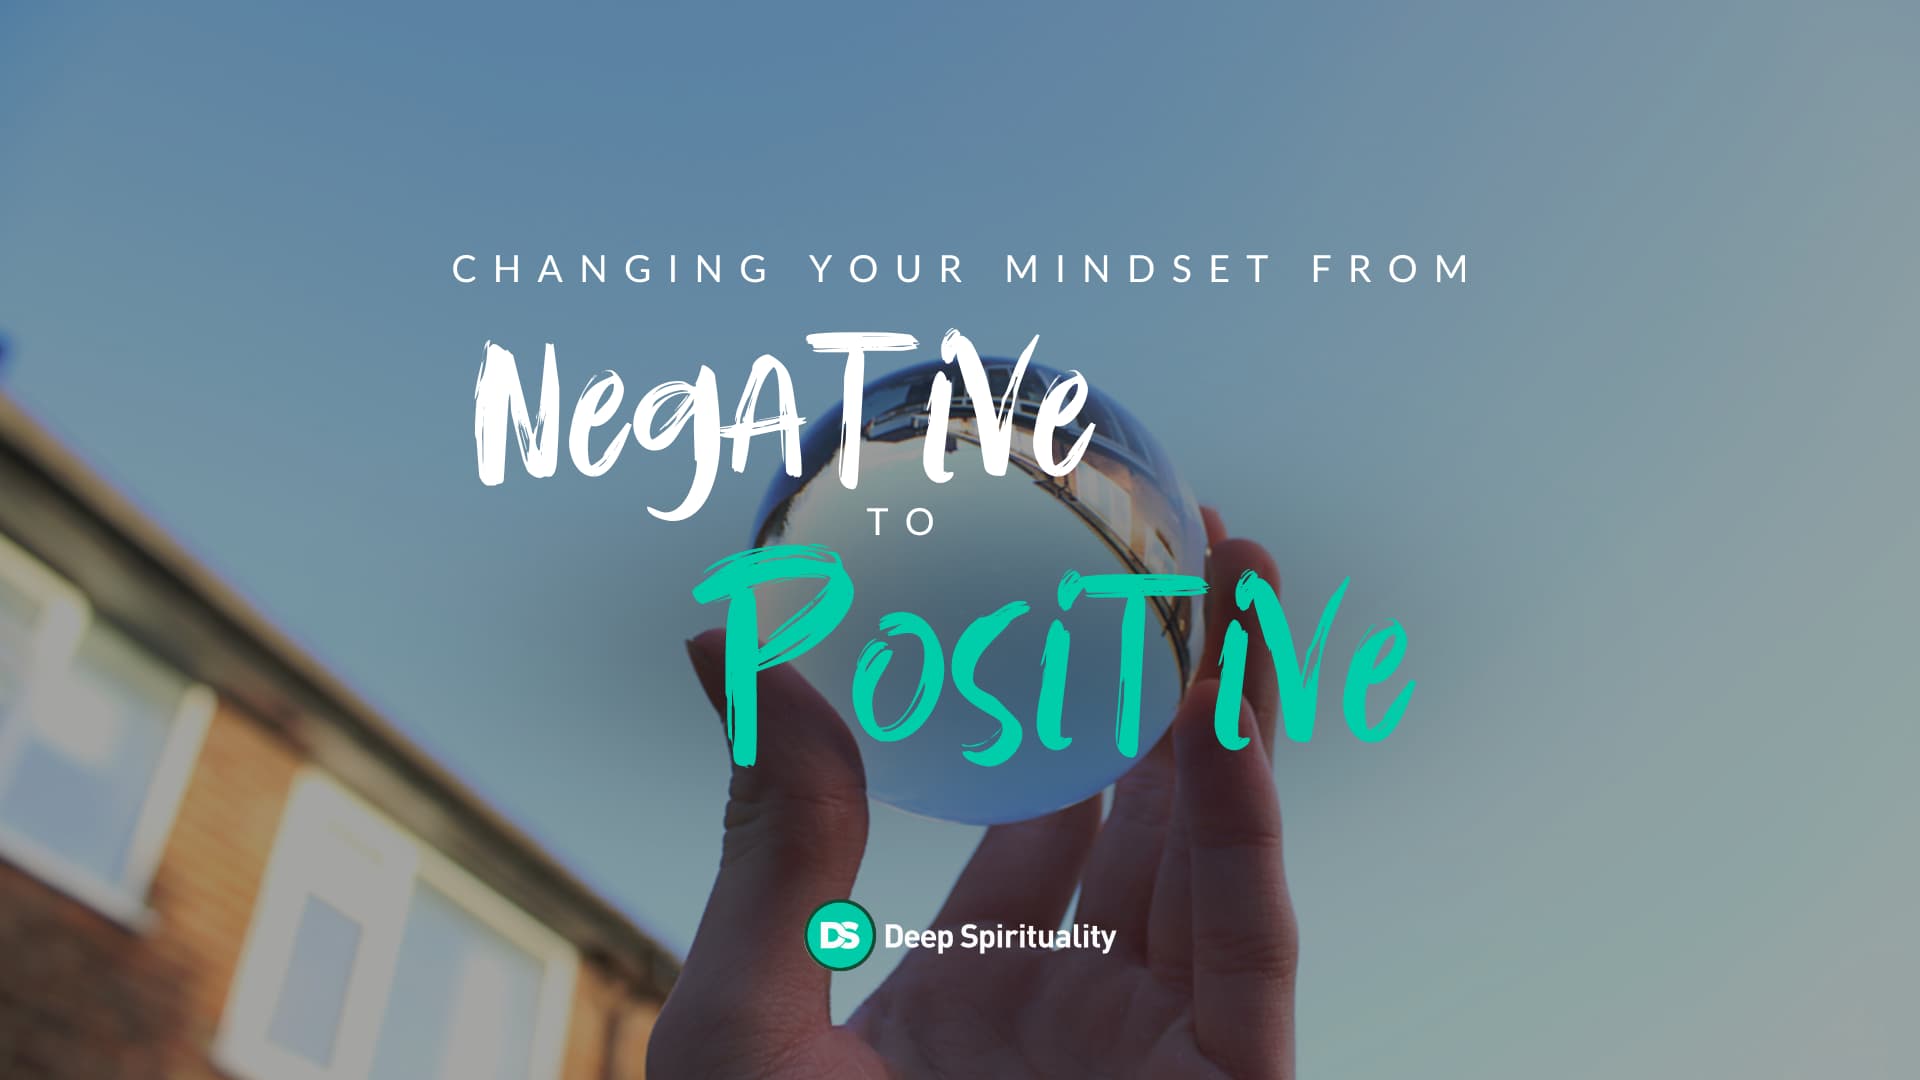 Changing Your Mindset From Negative to Positive  8